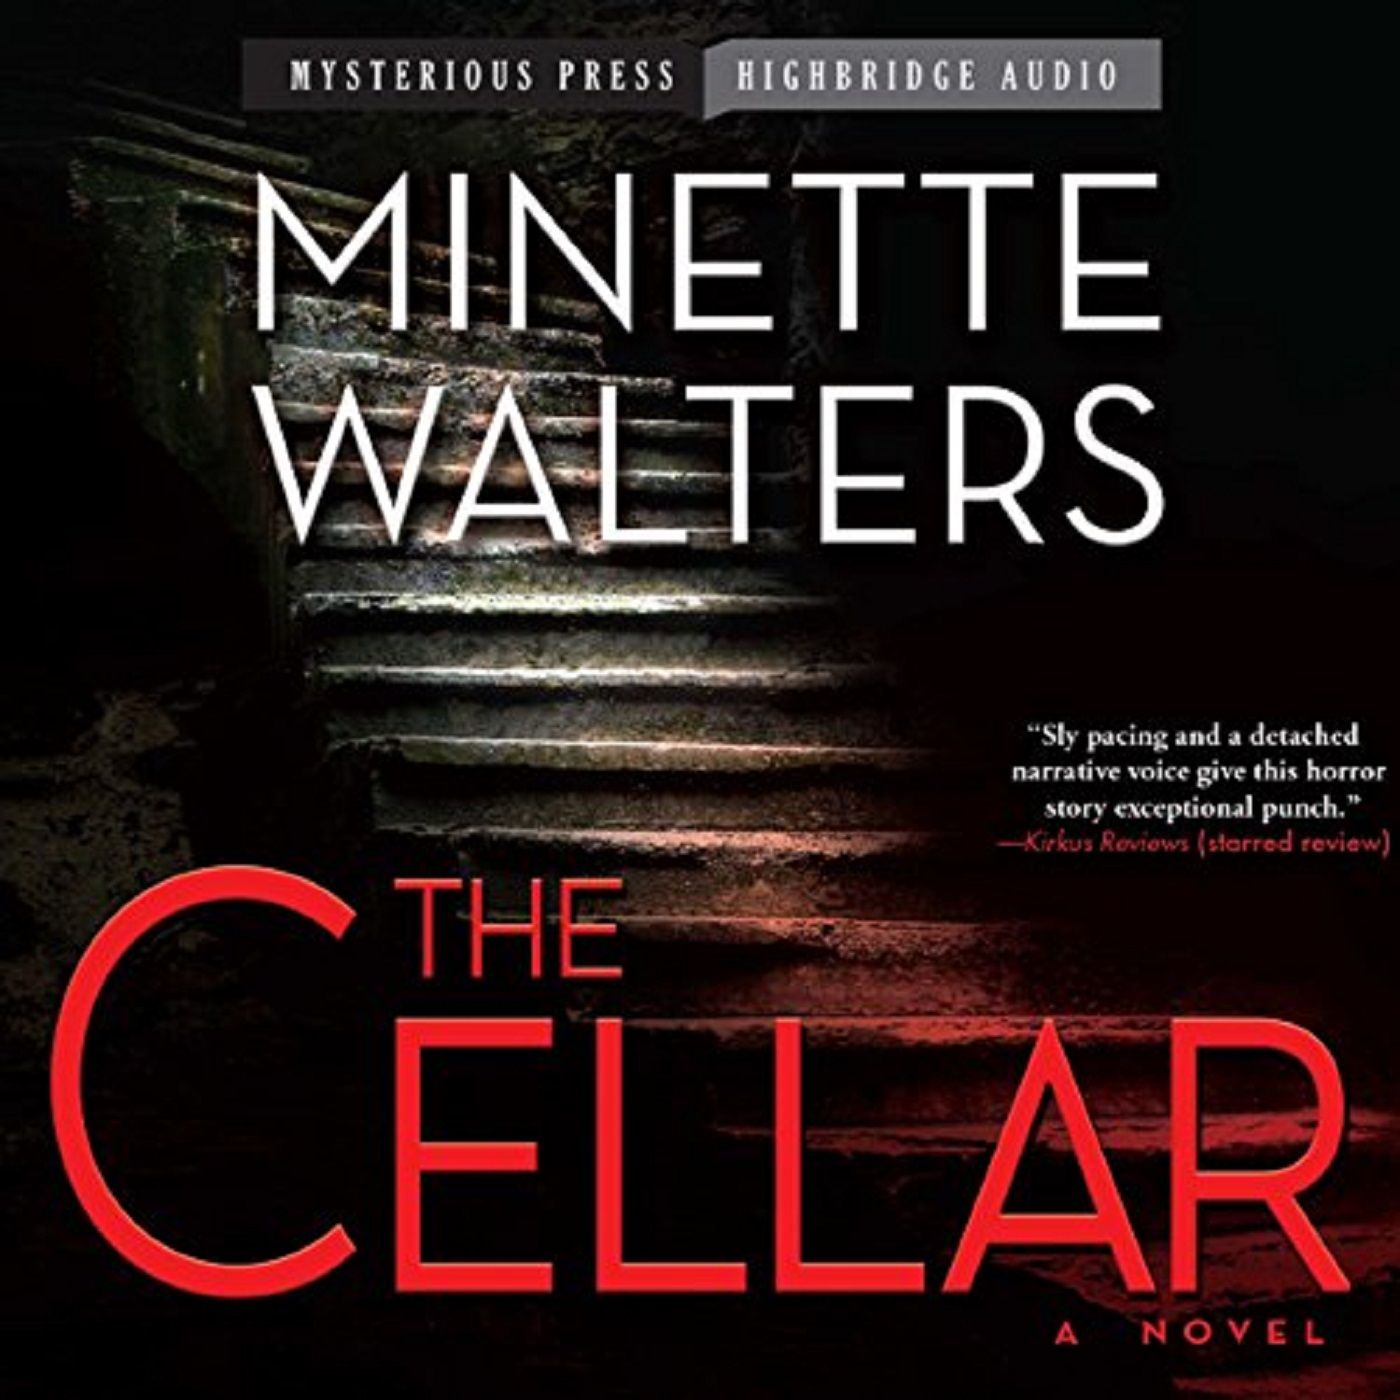 The Cellar by Minette Walters ch2